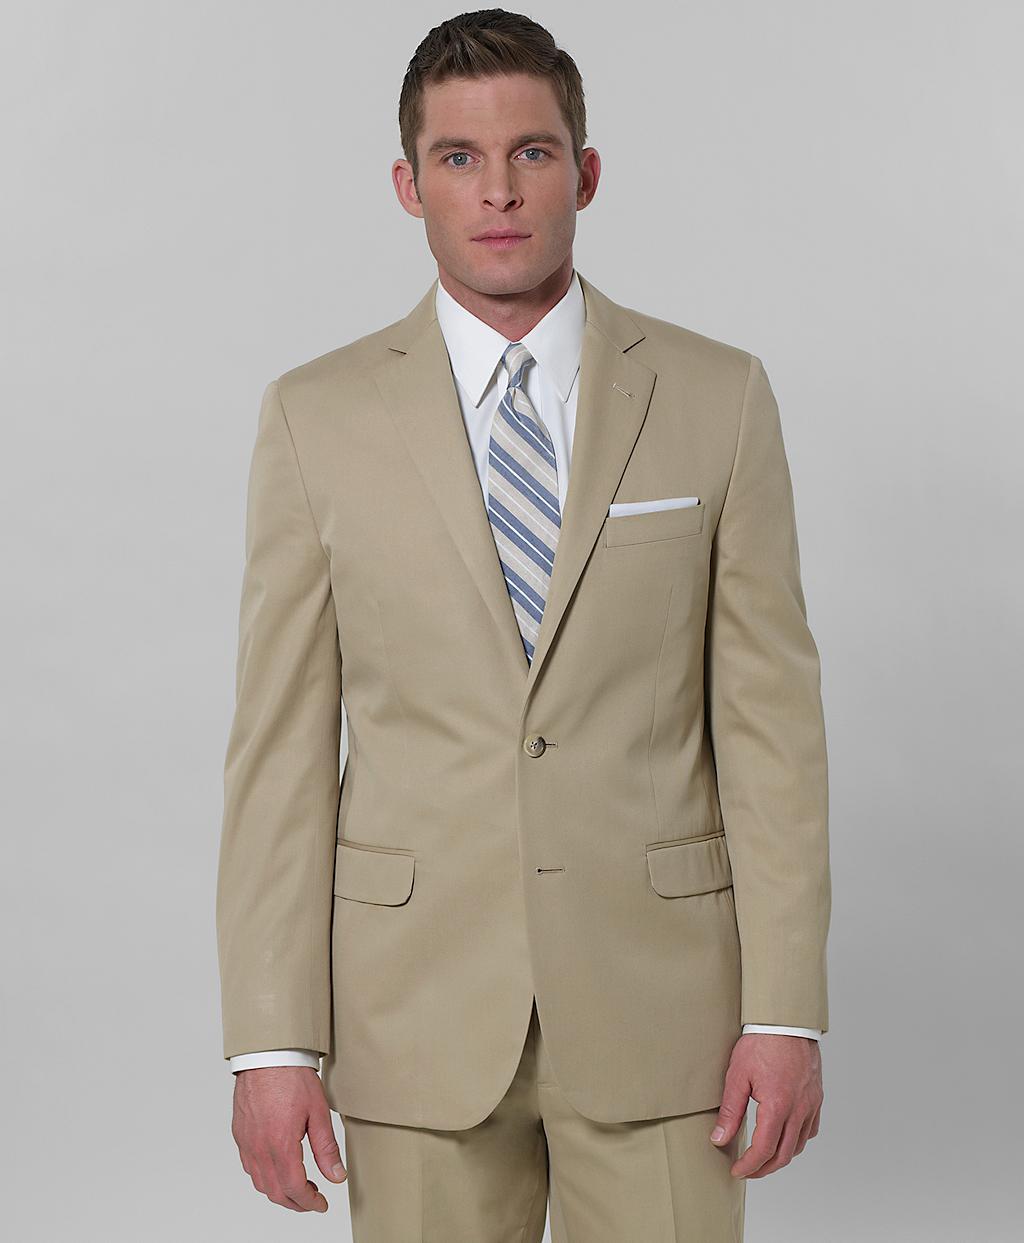 Lyst - Brooks Brothers Cotton Twill Fitzgerald Fit Suit in Natural for Men